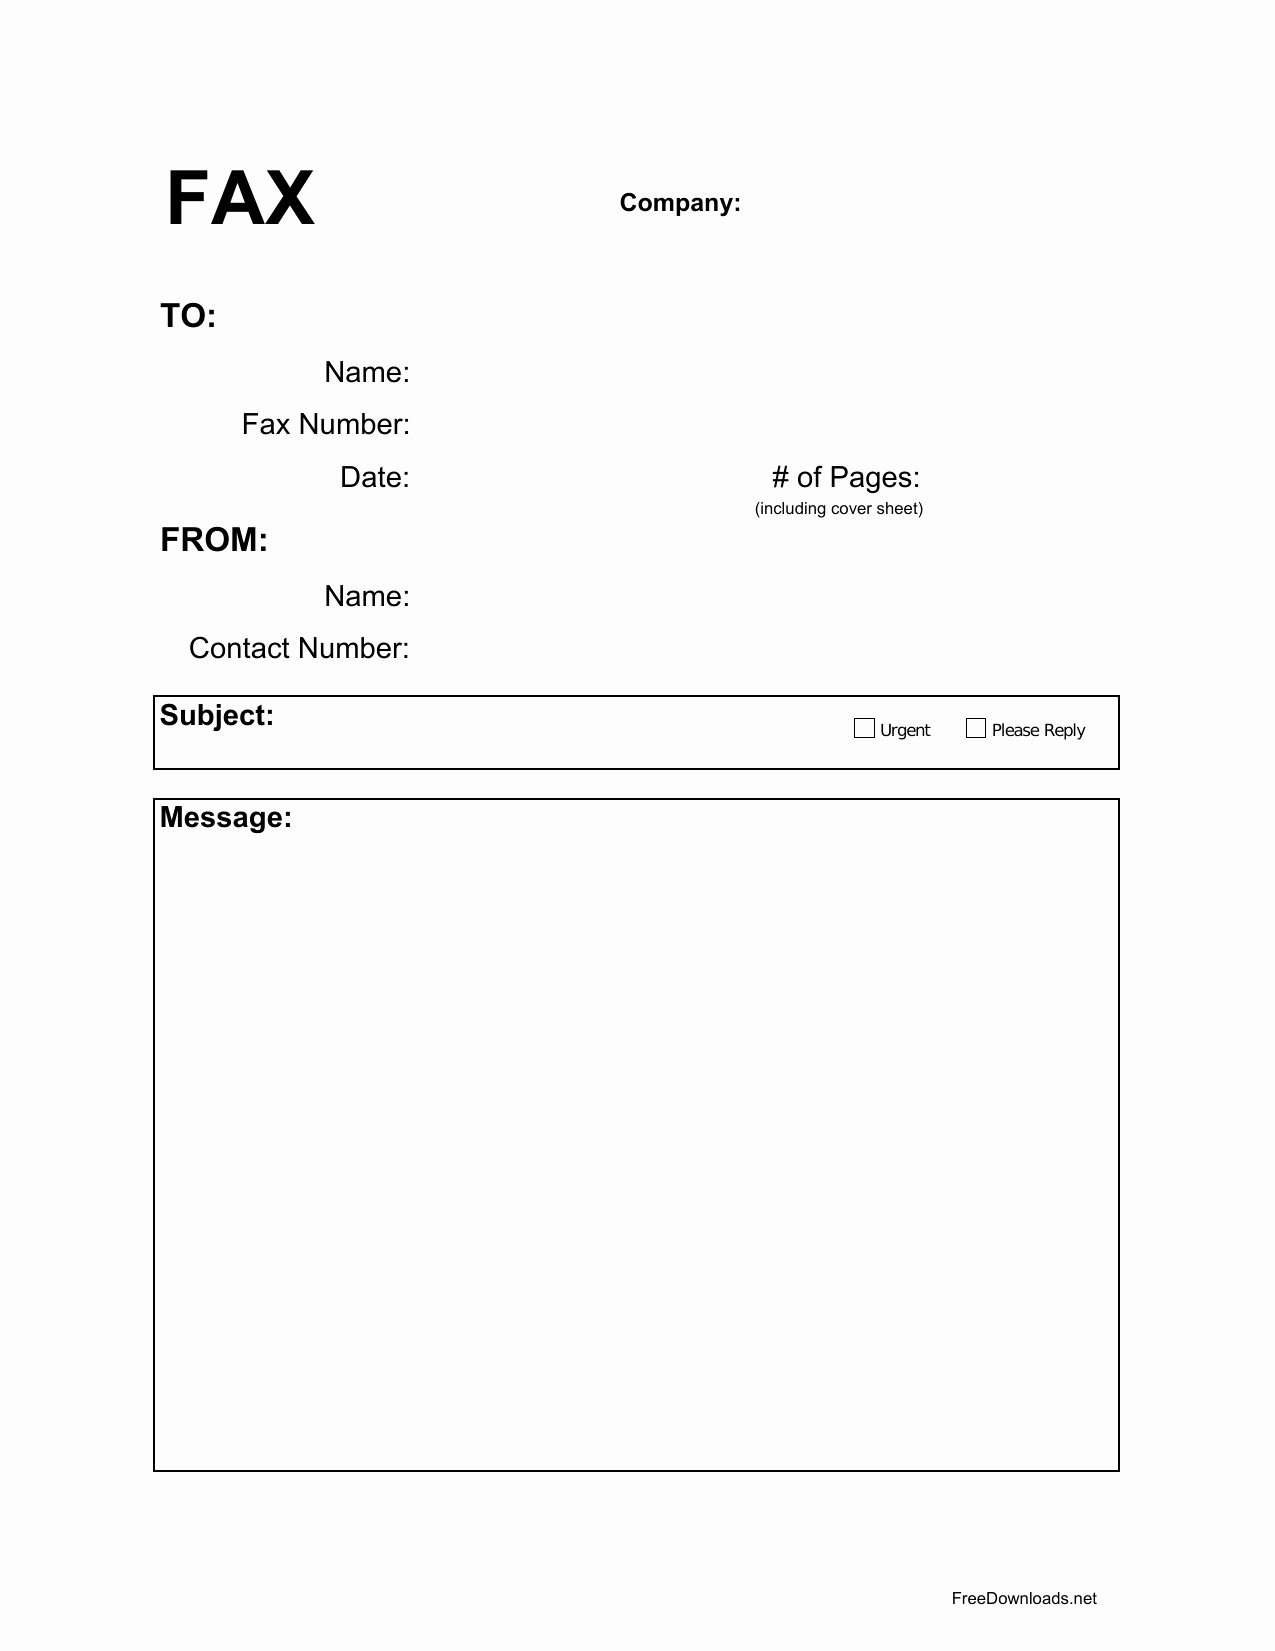 Fax Cover Sheet Download Free Fresh Download Fax Cover Sheet Template Pdf Rtf